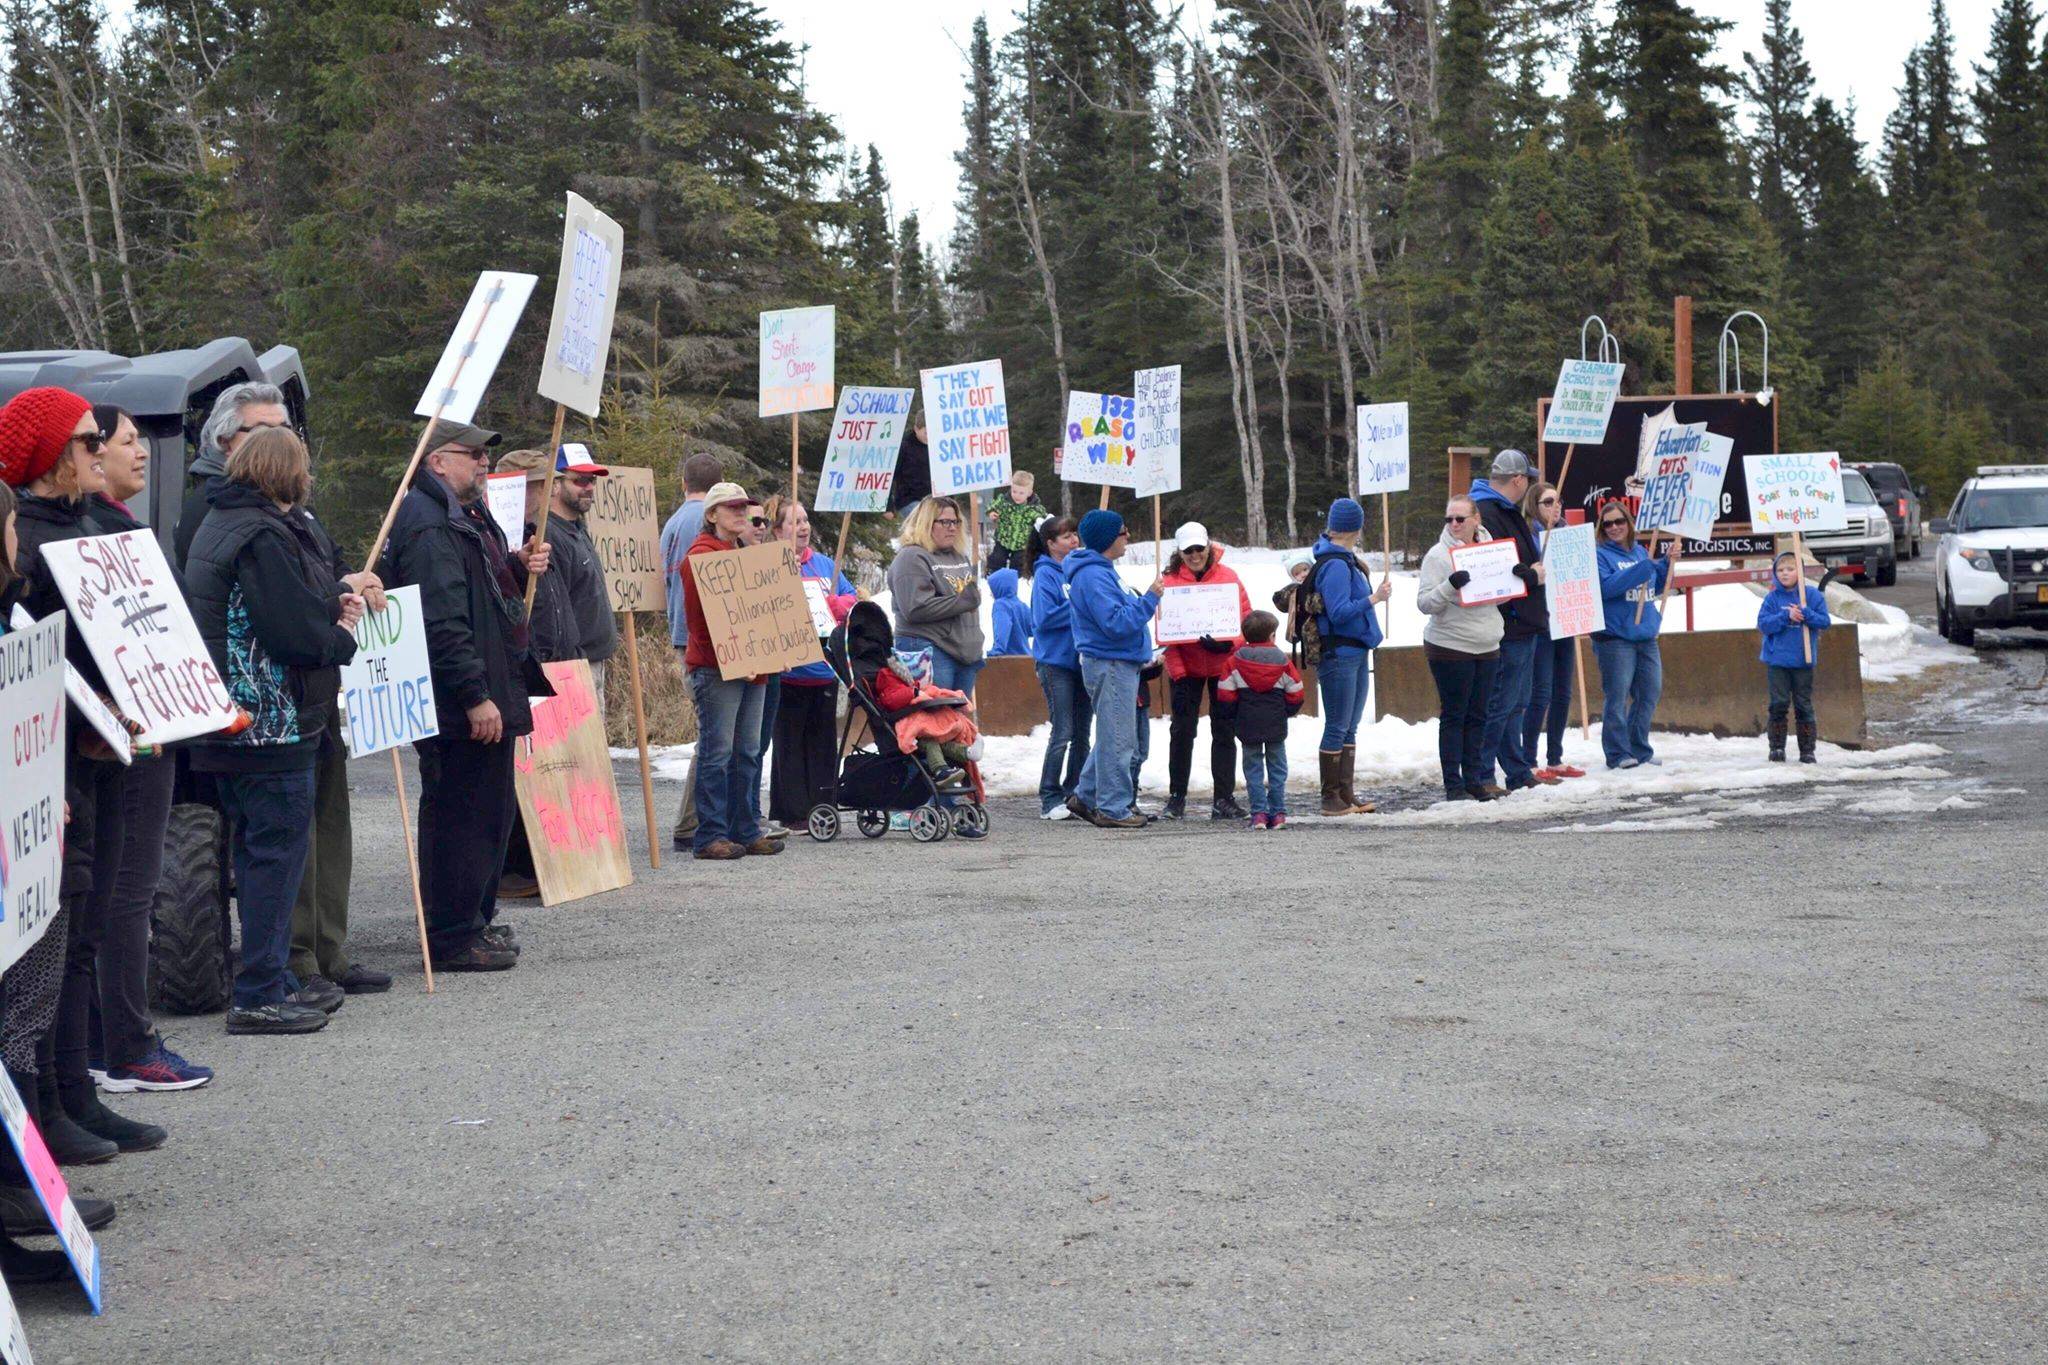 Protestors stand outside the Cannery Lodge in Kenai, AK ahead of Governor Dunleavy’s presentation about his proposed budget on March 26, 2019. (Photo by Victoria Petersen/Peninsula Clarion)